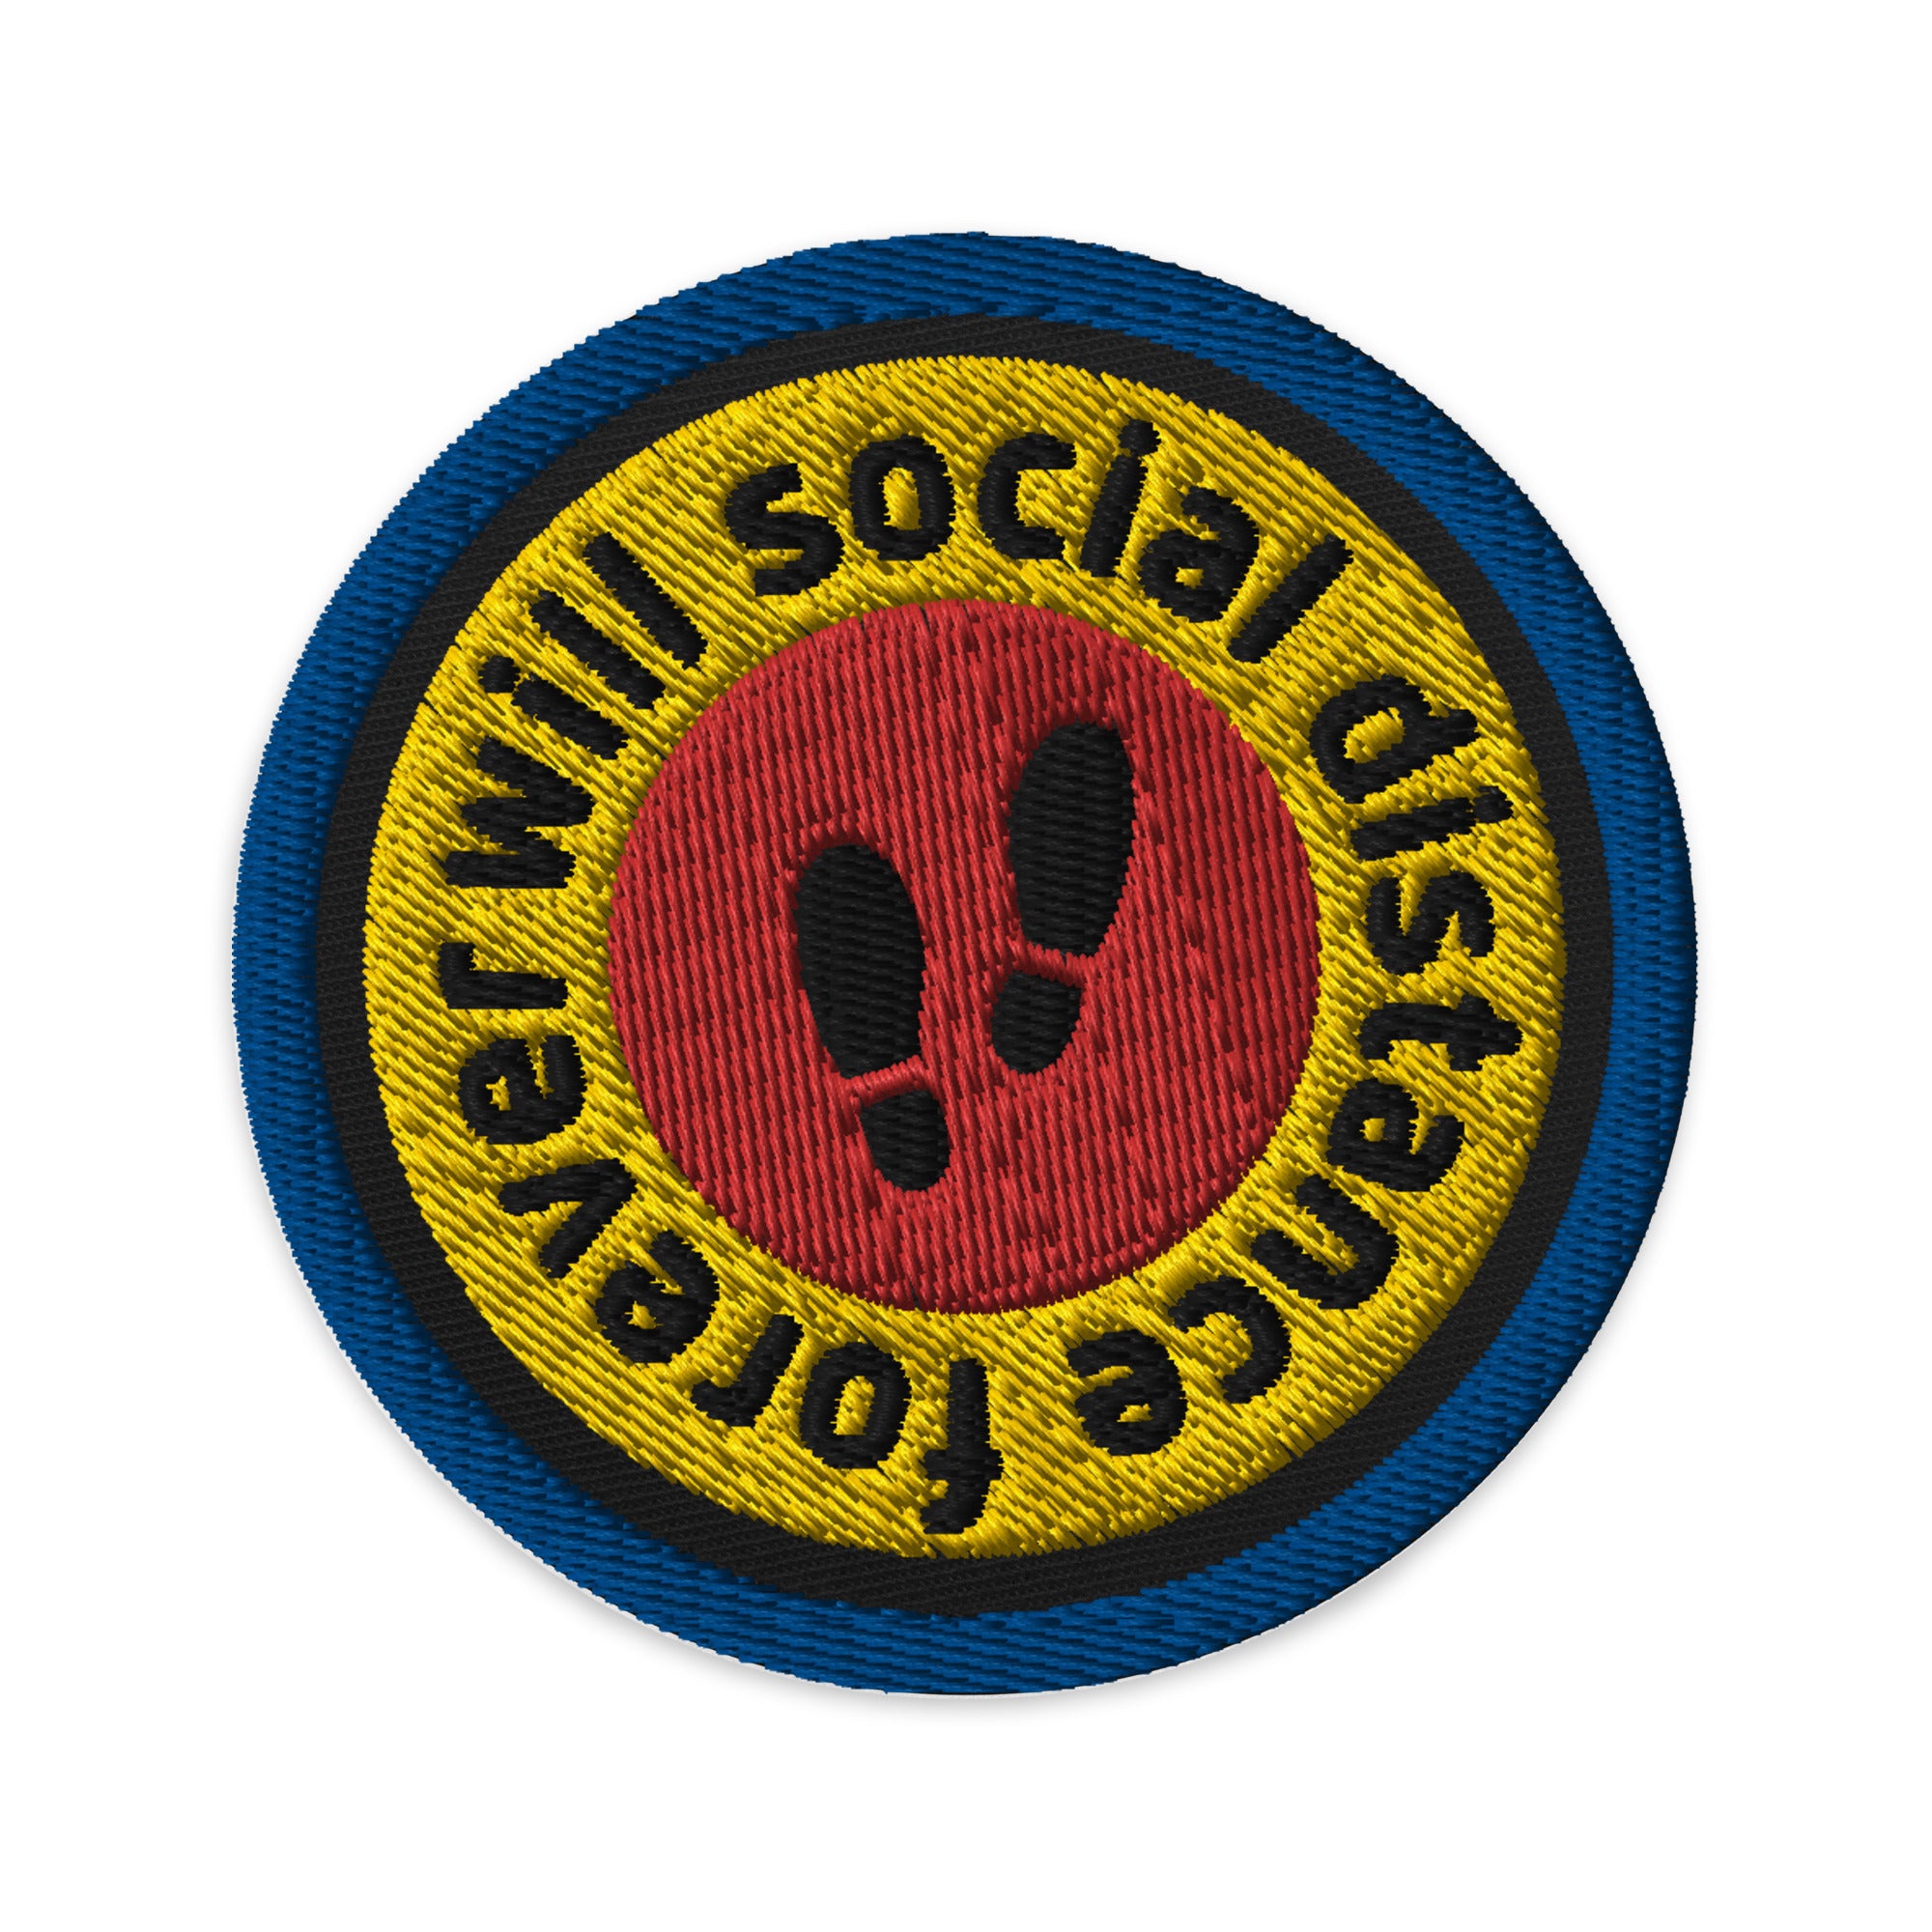 Will Social Distance Forever Patch